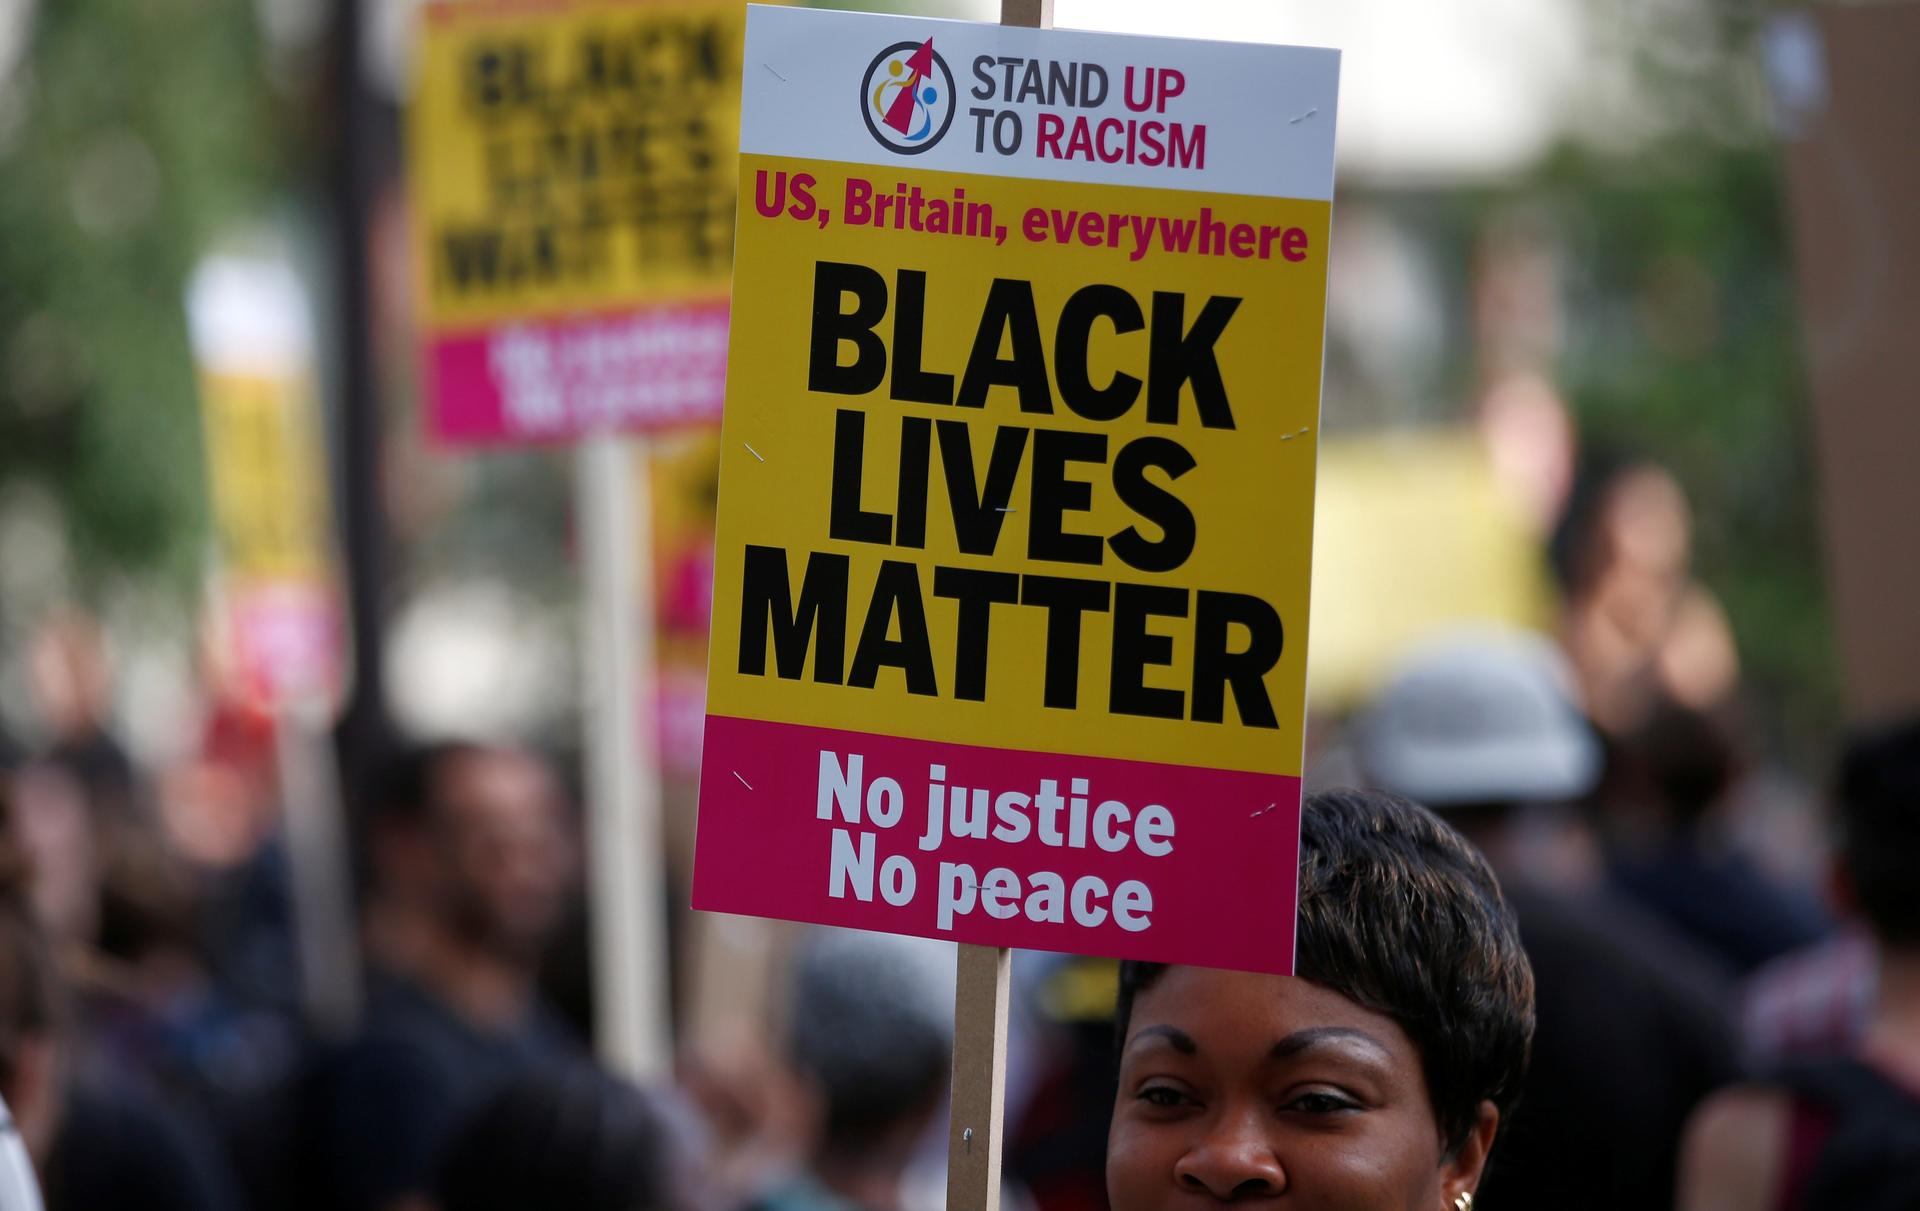 A supporter of Black Lives Matter at a protest in London.